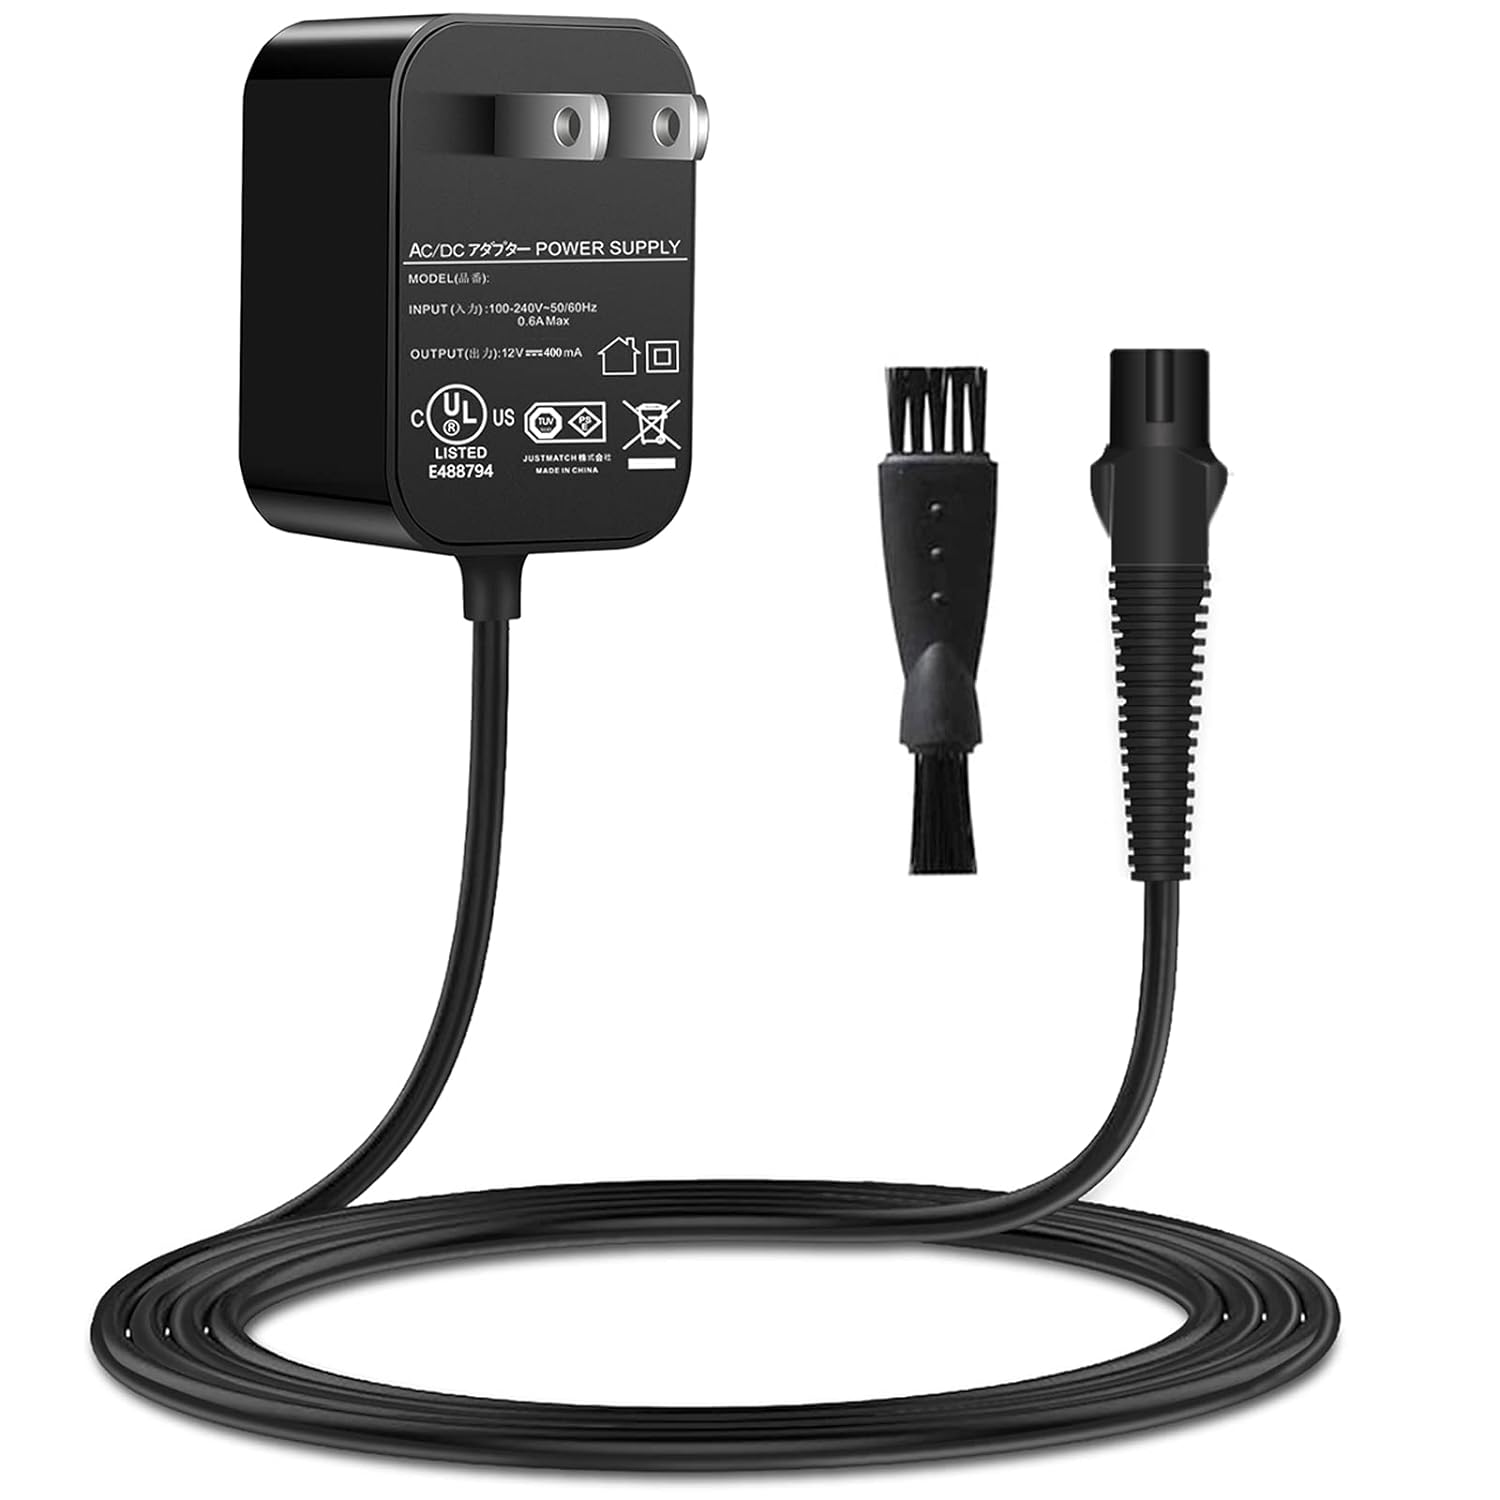 Charger Replacement for Braun Charger, 12V Power Cord Compatible with Braun Shaver Series 3/7/5/1/9, Razor 3040s 310s 34